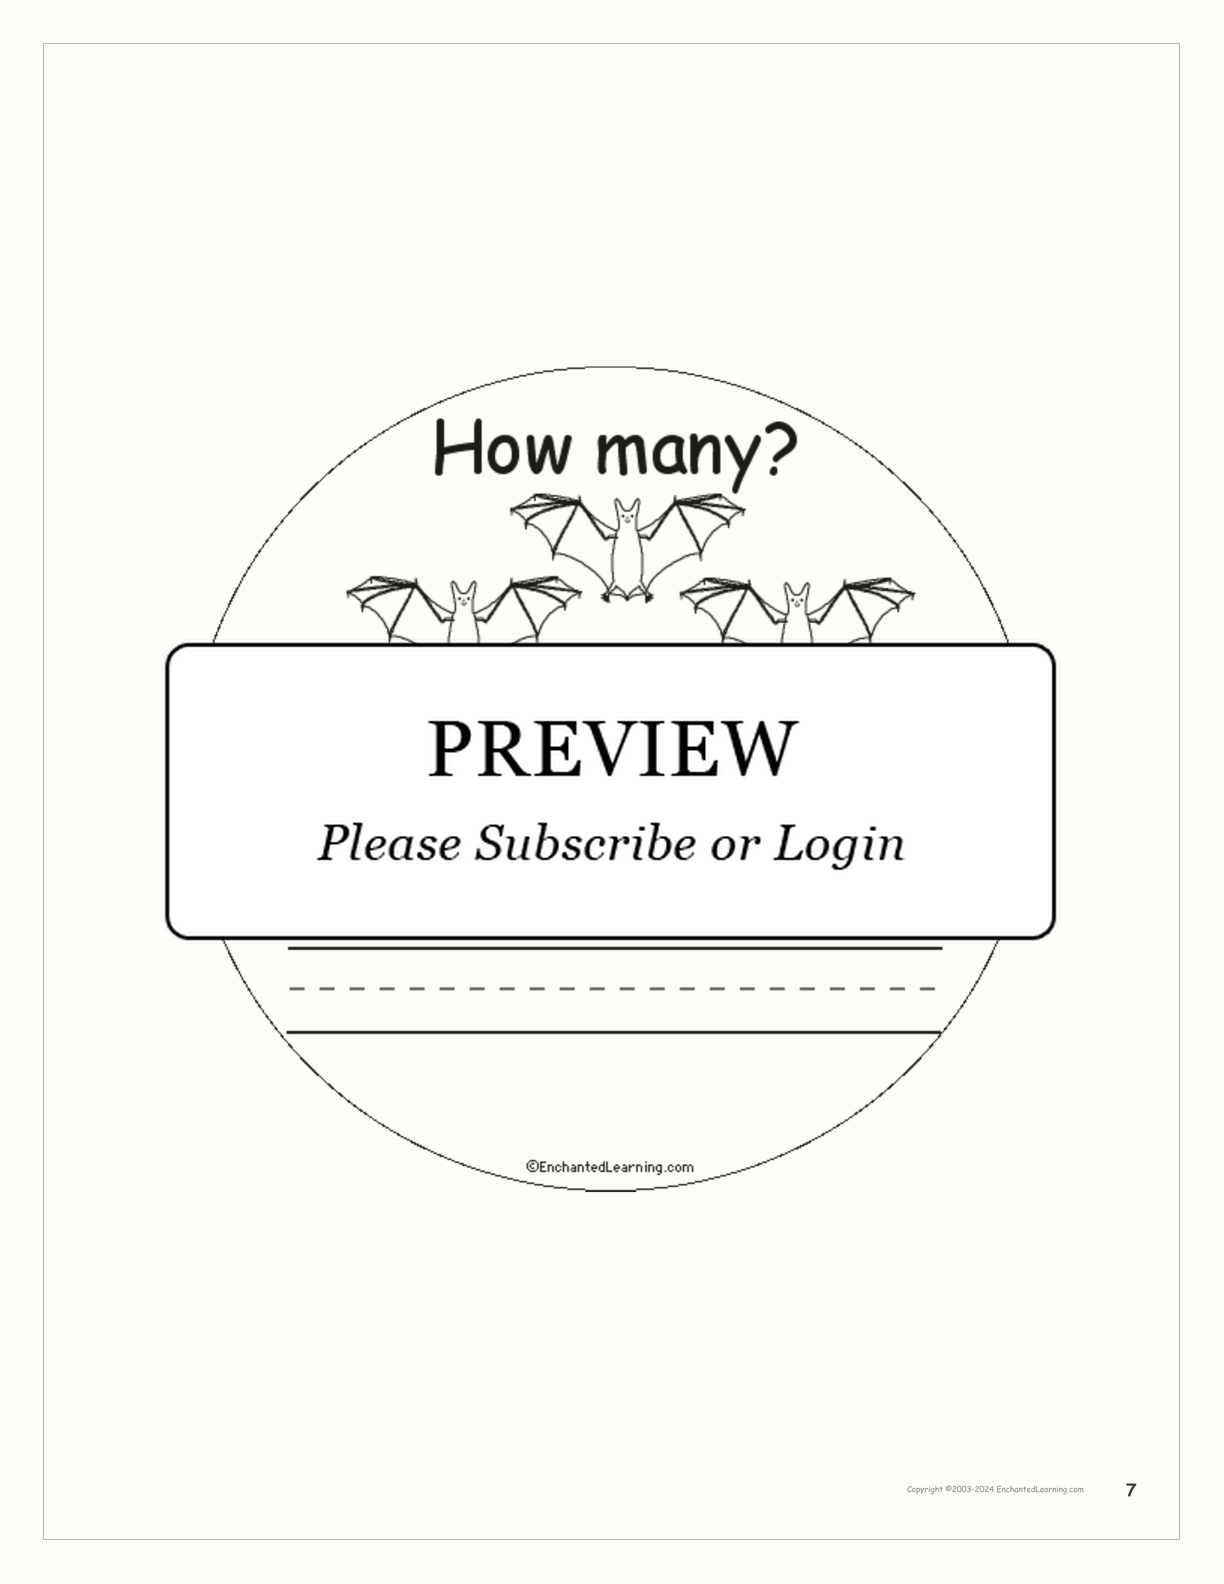 How Many Bats? Book for Early Readers interactive printout page 7